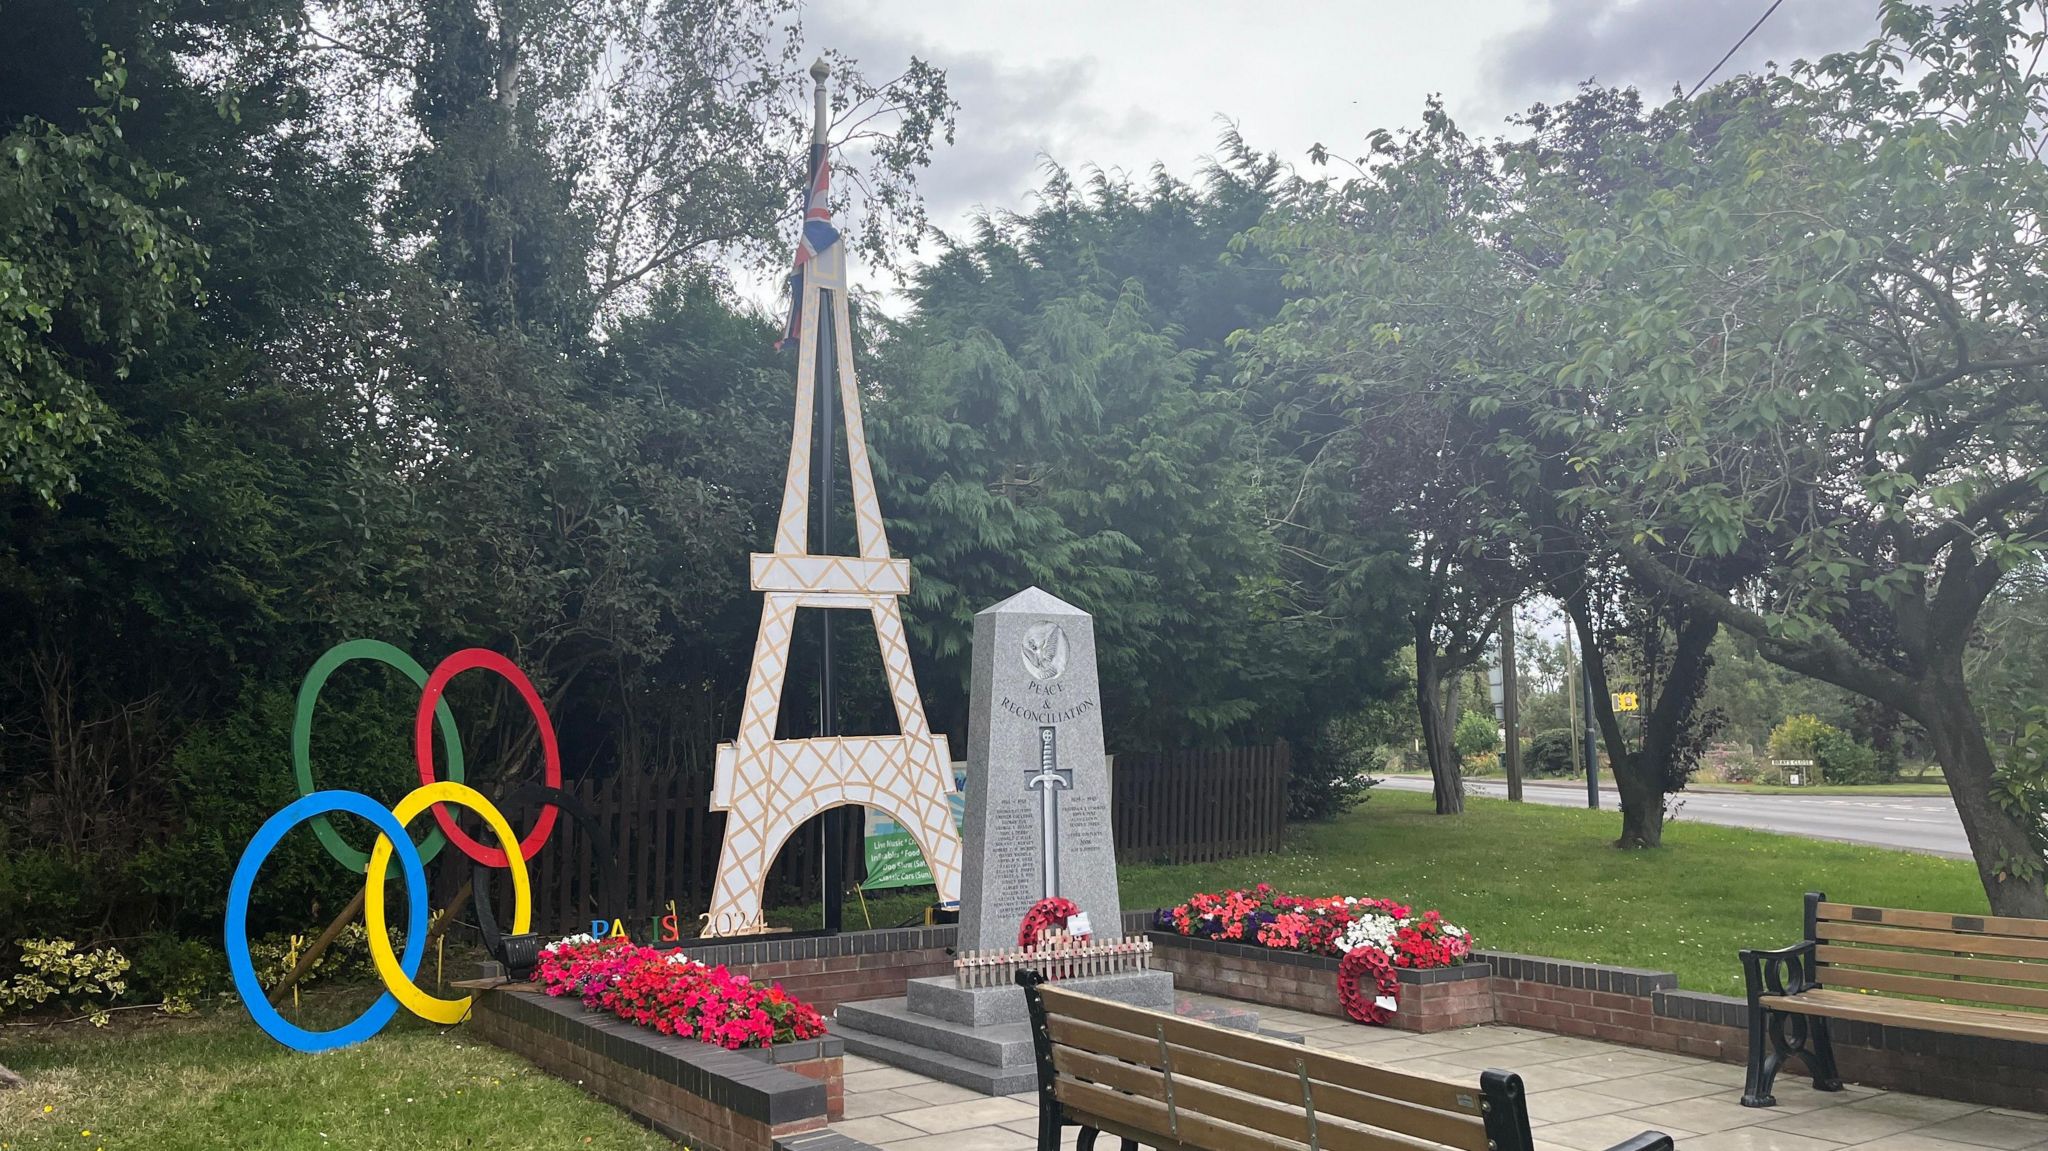 A model of the Eiffel Tower and Olympic rings sit alongside a war memorial, with flower beds and benches in front